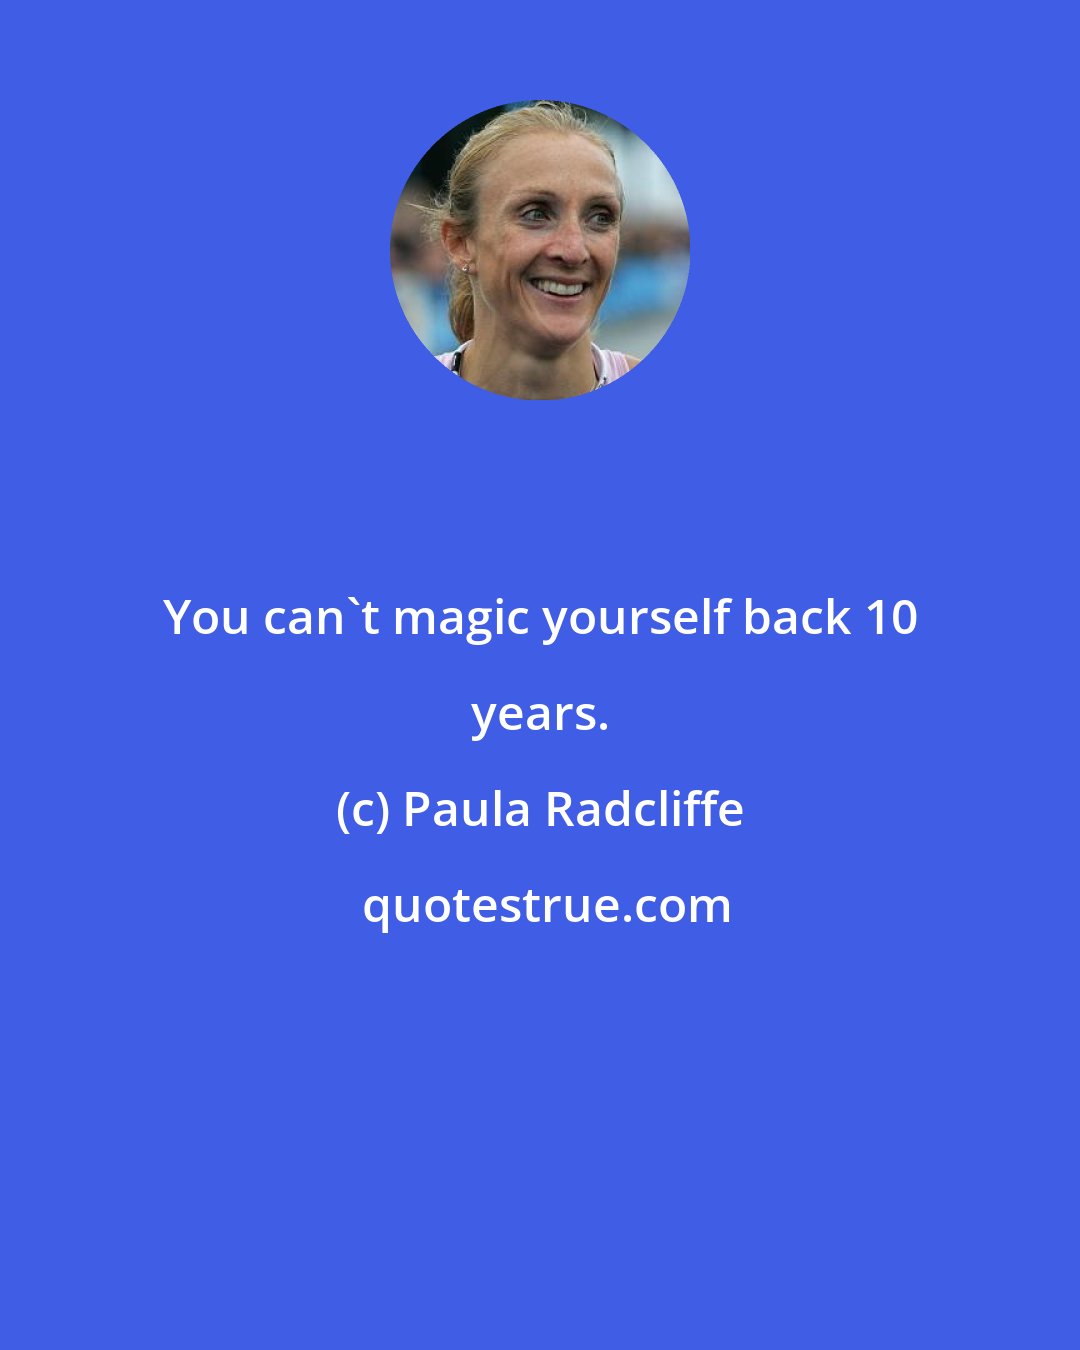 Paula Radcliffe: You can't magic yourself back 10 years.